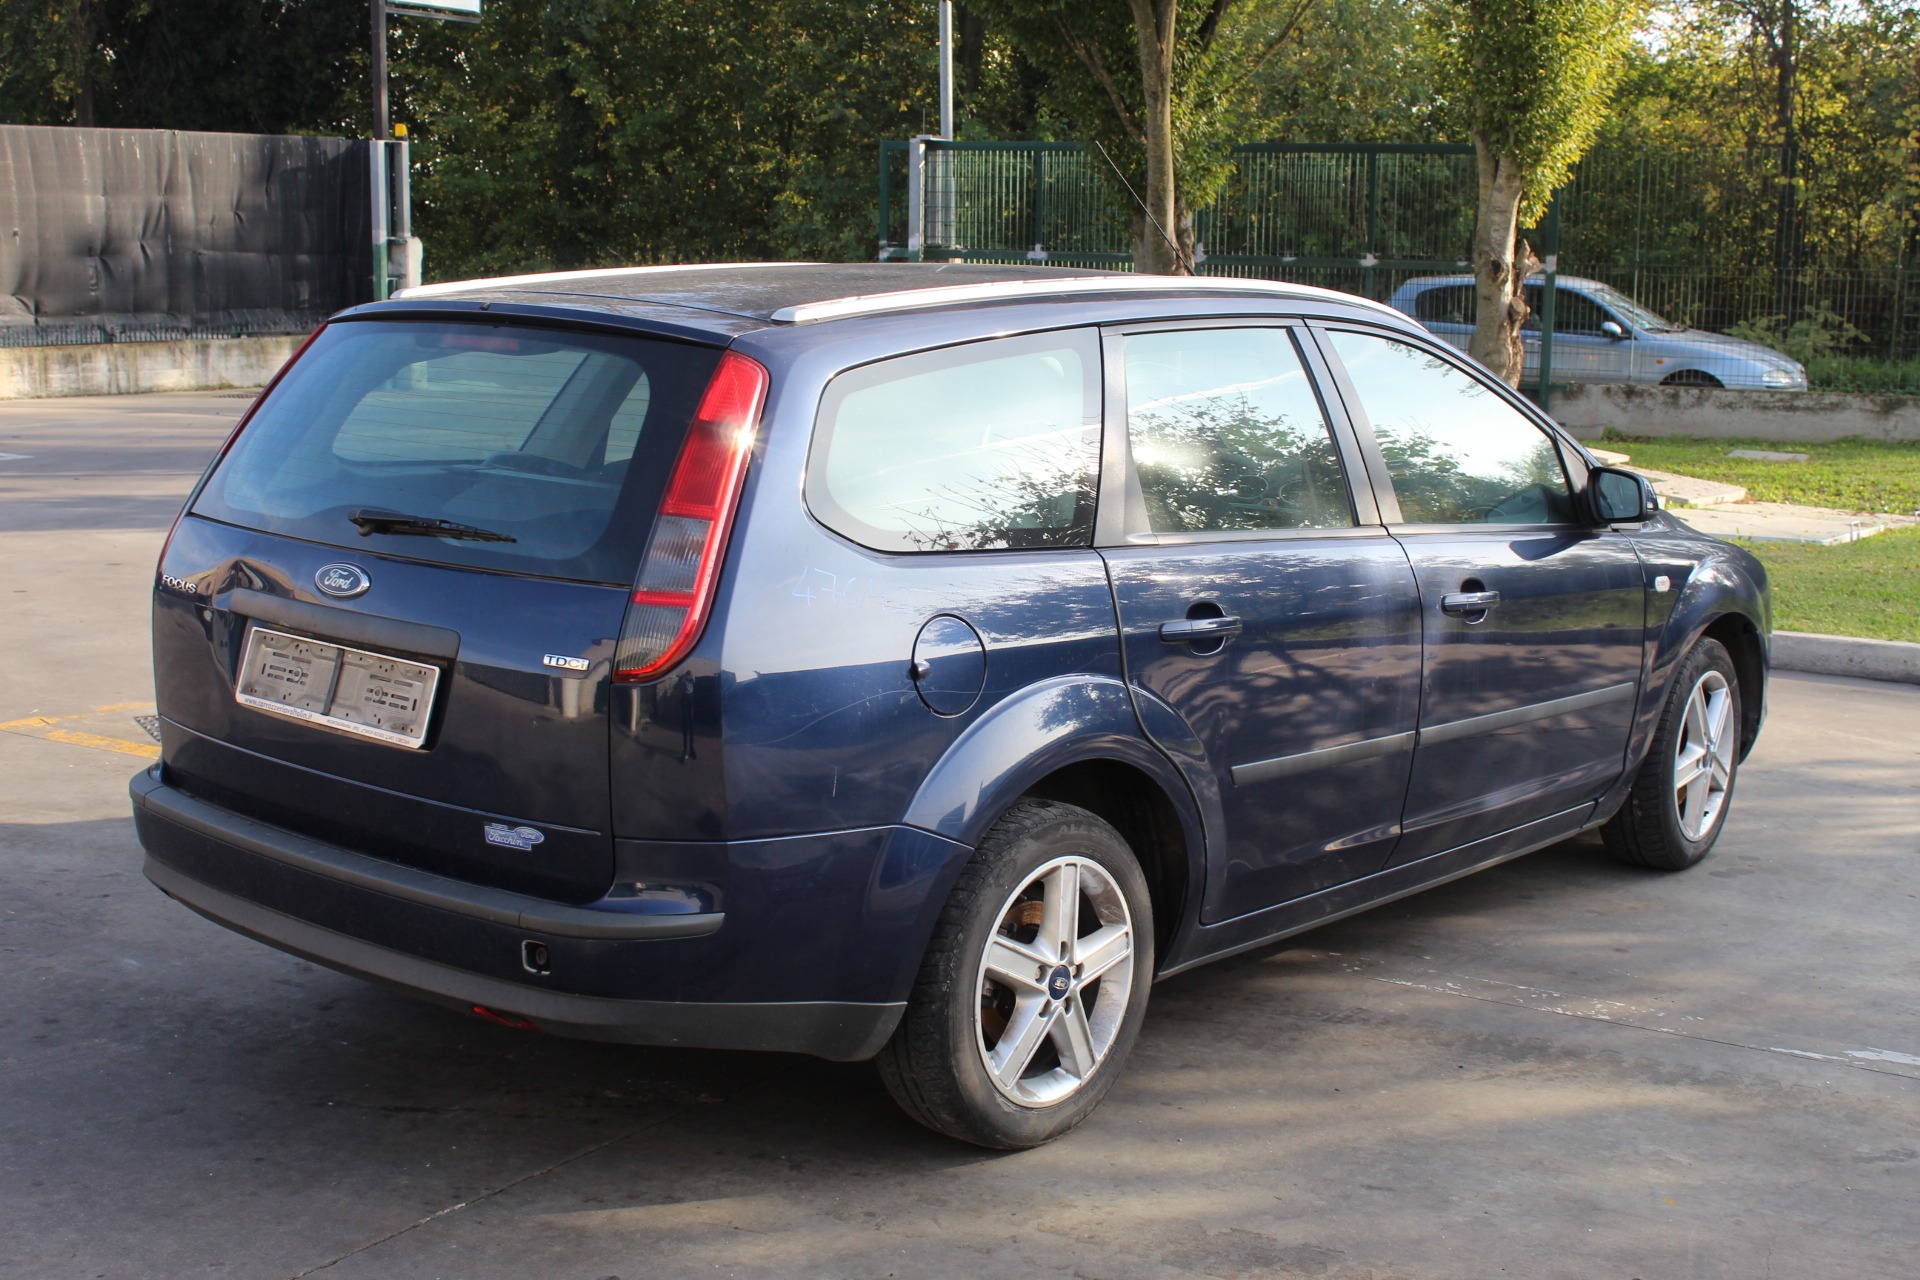 FORD FOCUS SW 1.6 D 66KW 5M 5P (2006) RICAMBI IN MAGAZZINO